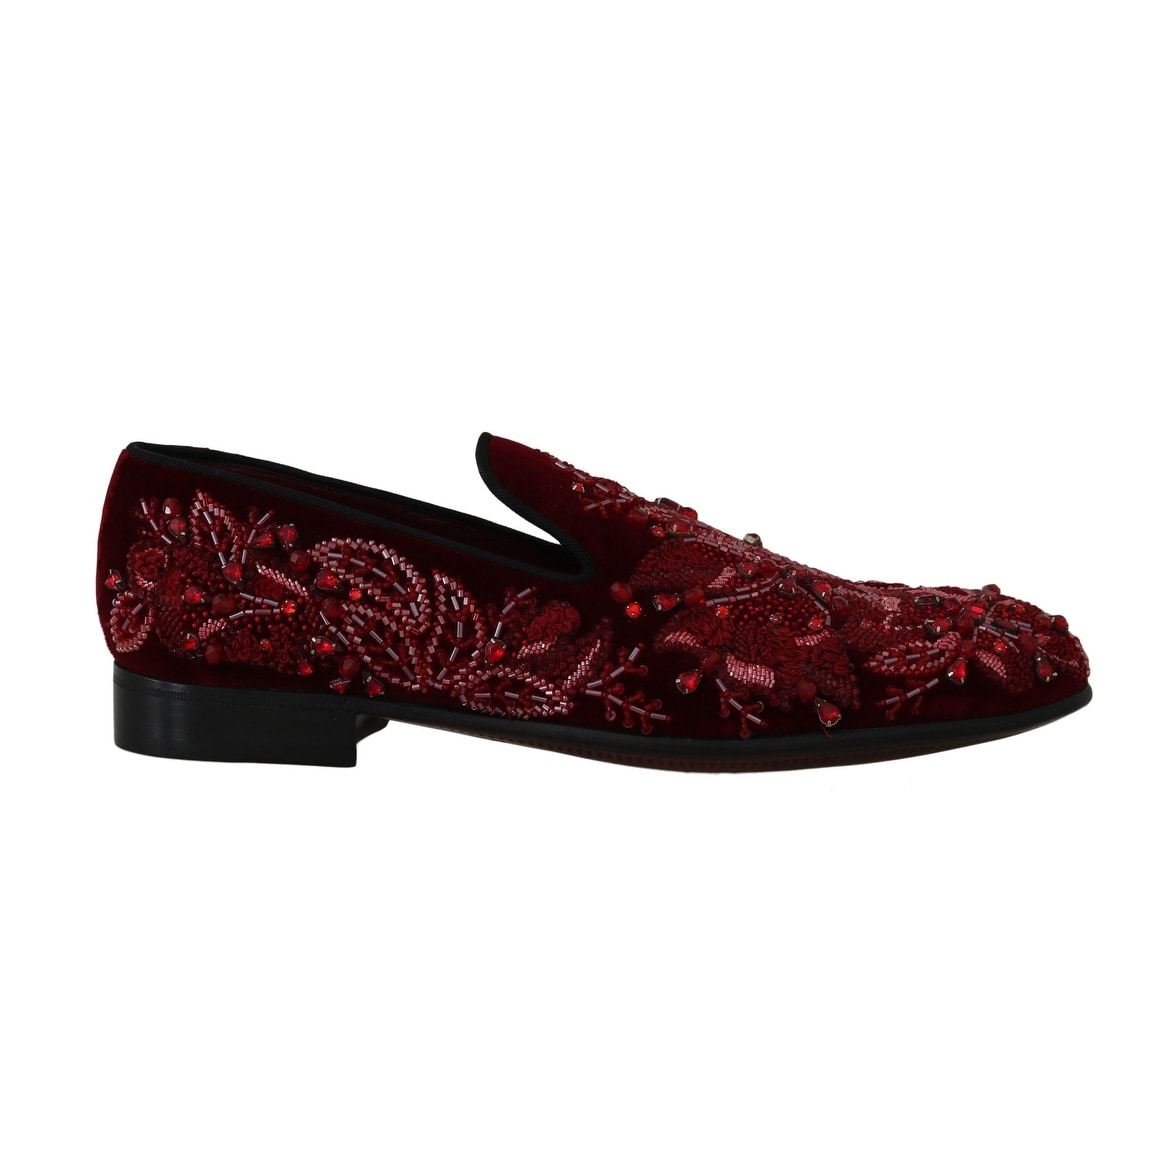 dolce gabbana mens loafers